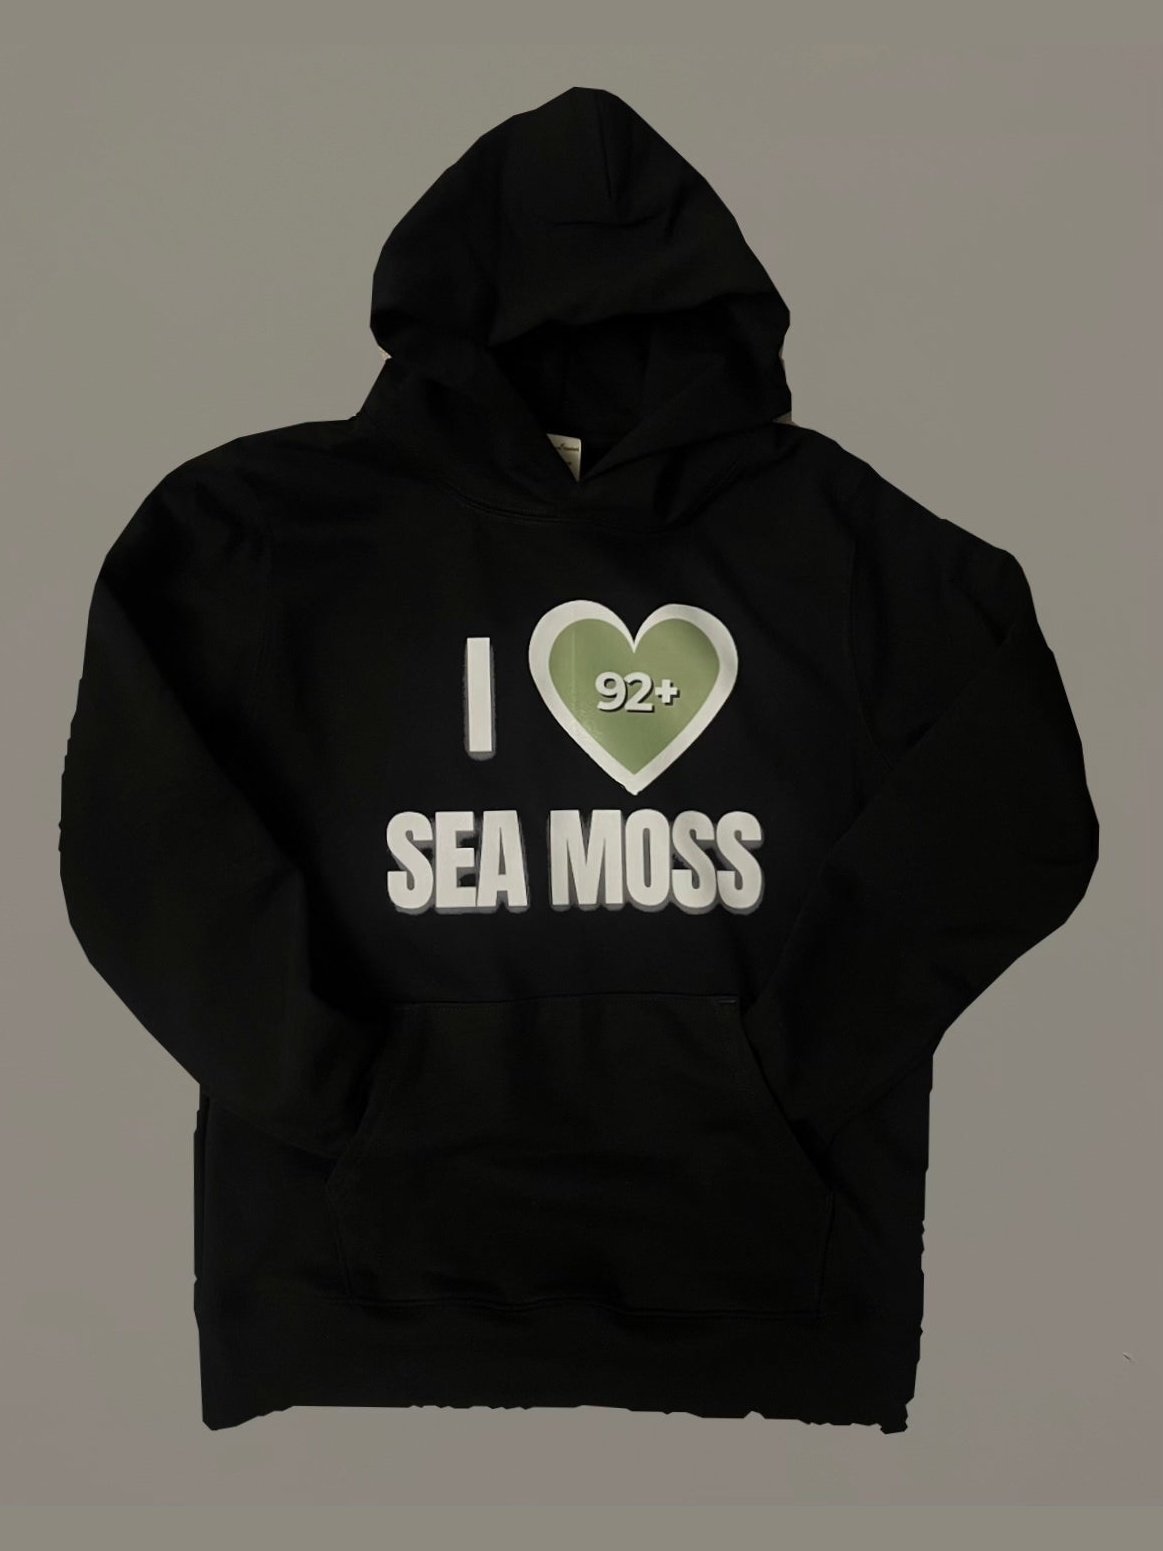 I Love Sea Moss - Hoodie
I 💚 Sea Moss Hoodie 
HEAVY WEIGHT FLEECE PULLOVER HOODIE ADULT
Available in:  Black


PRODUCT DETAIL: 100% Cotton
9 oz, kangaroo style with double needled top stitApparel92+ HealthLove Sea Moss - HoodieKLM